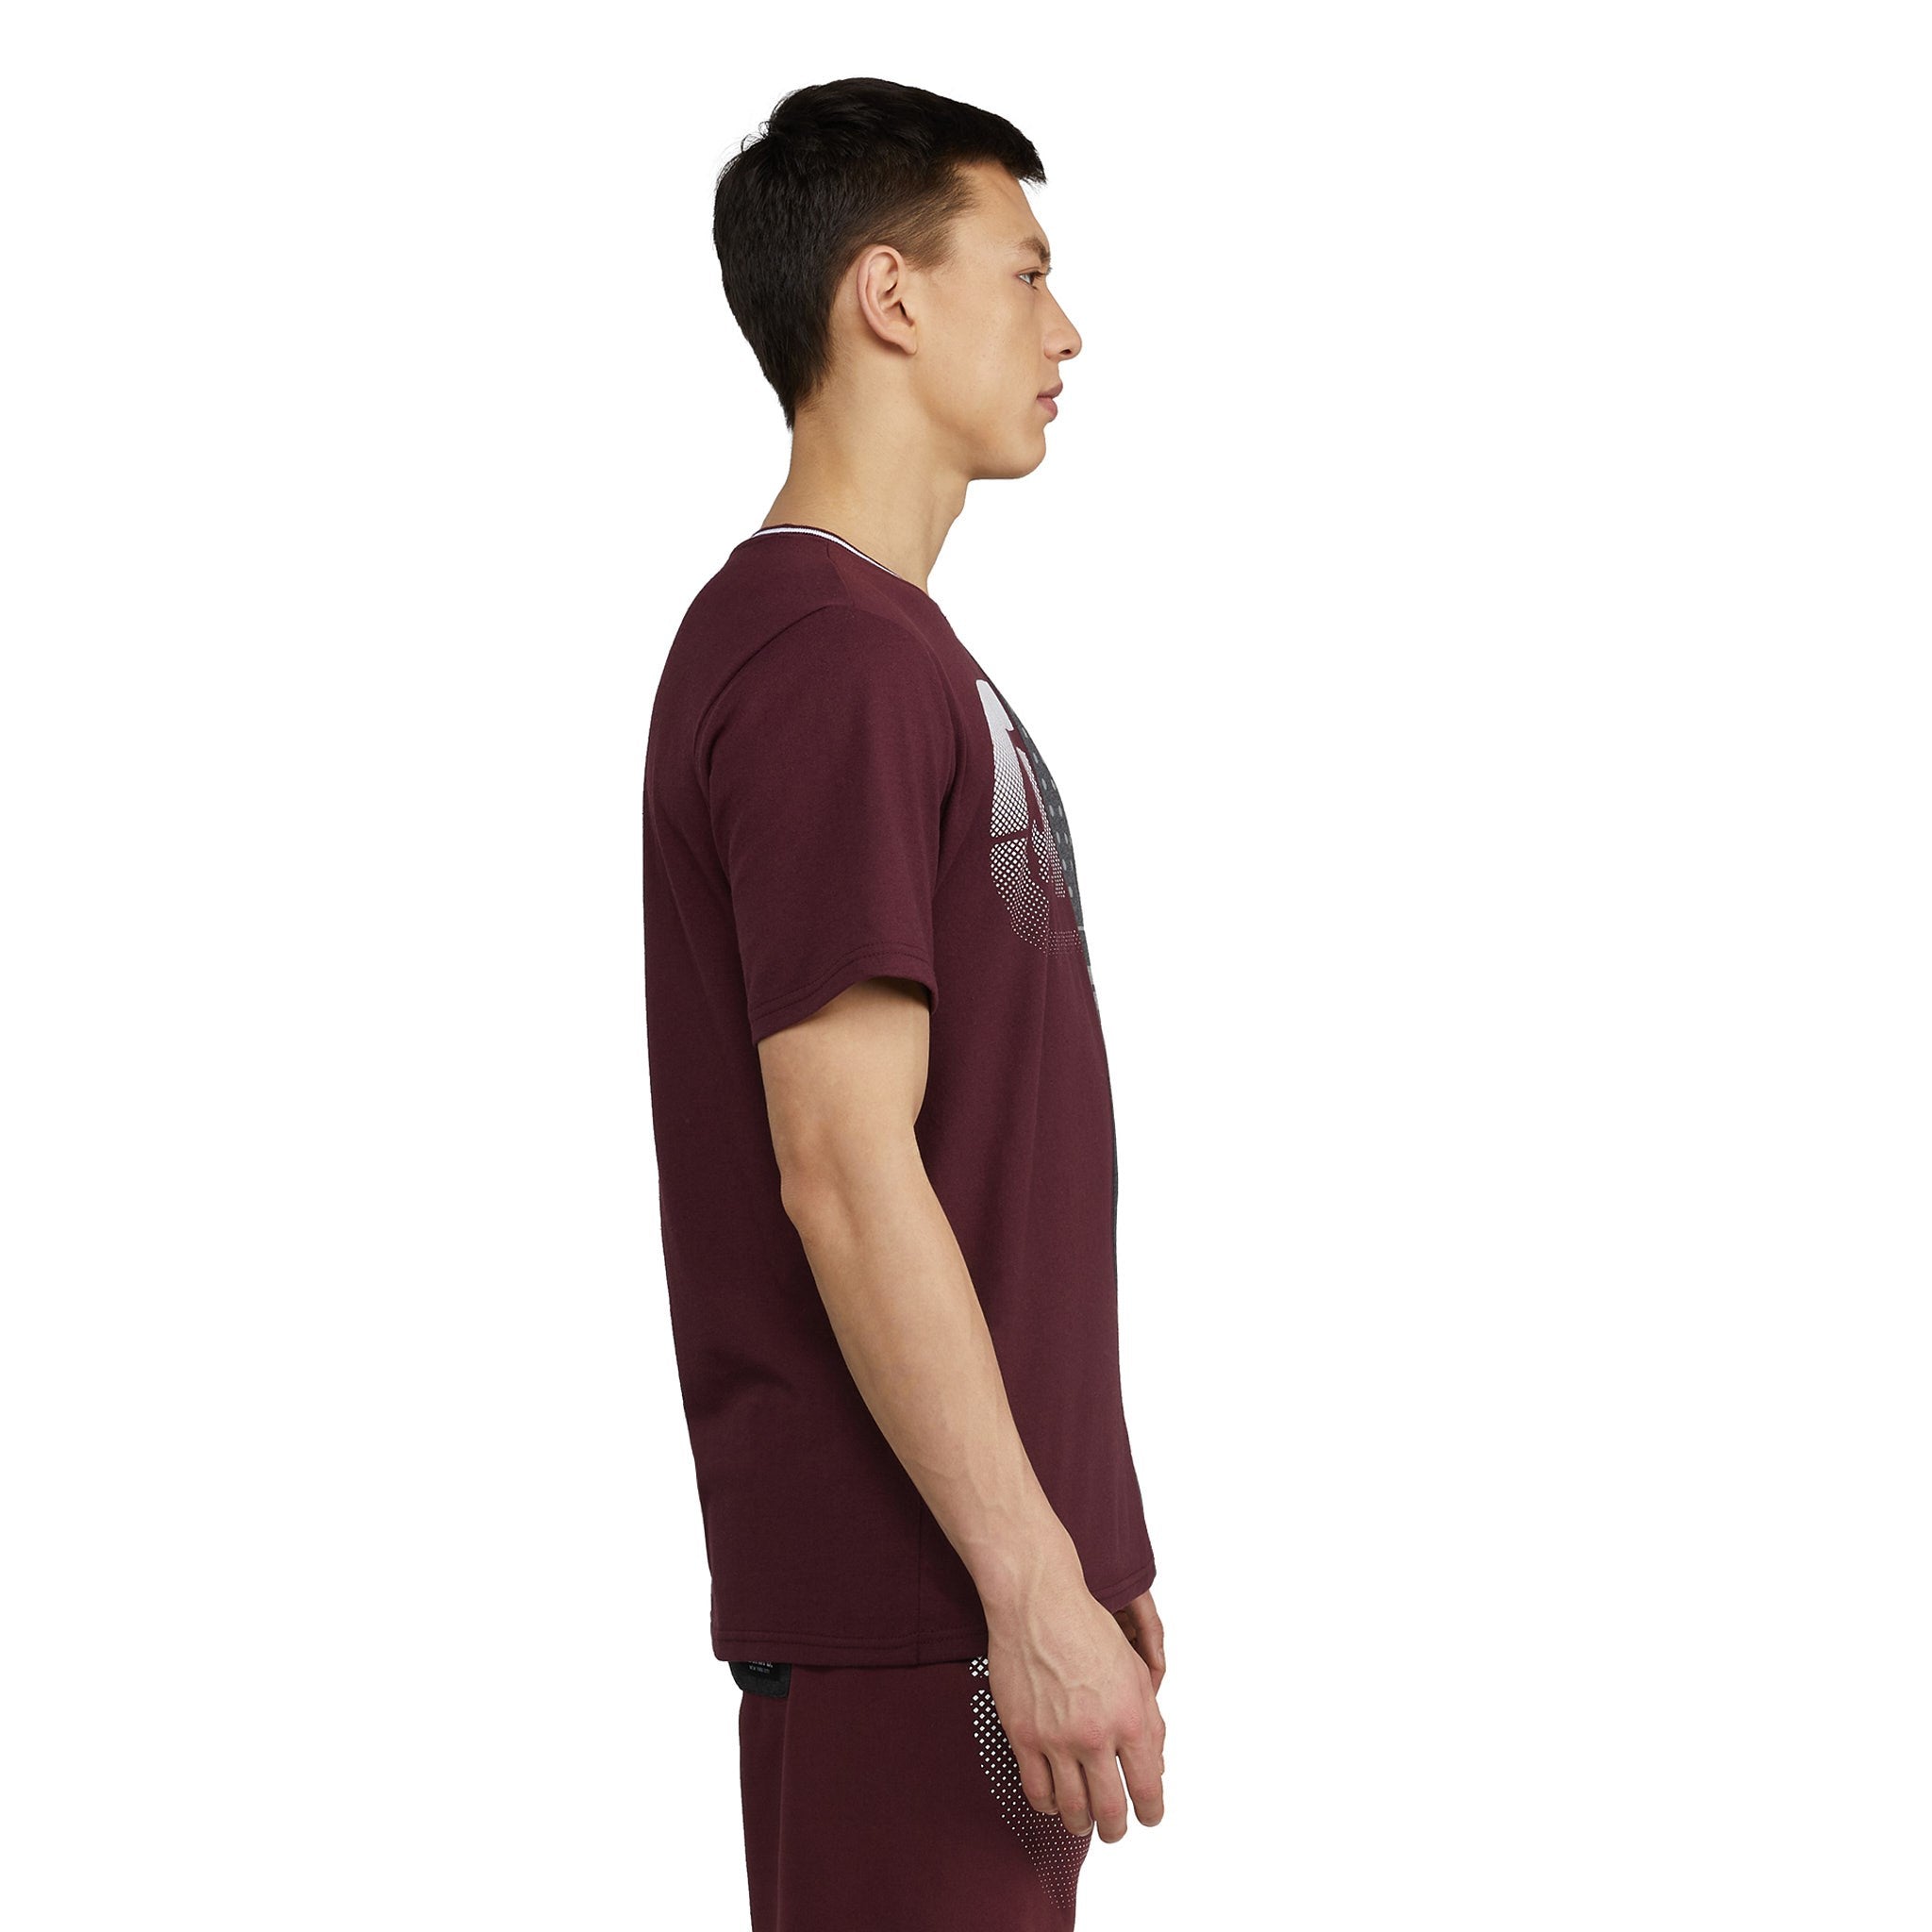 Division 1 Short Sleeve Knit Tee